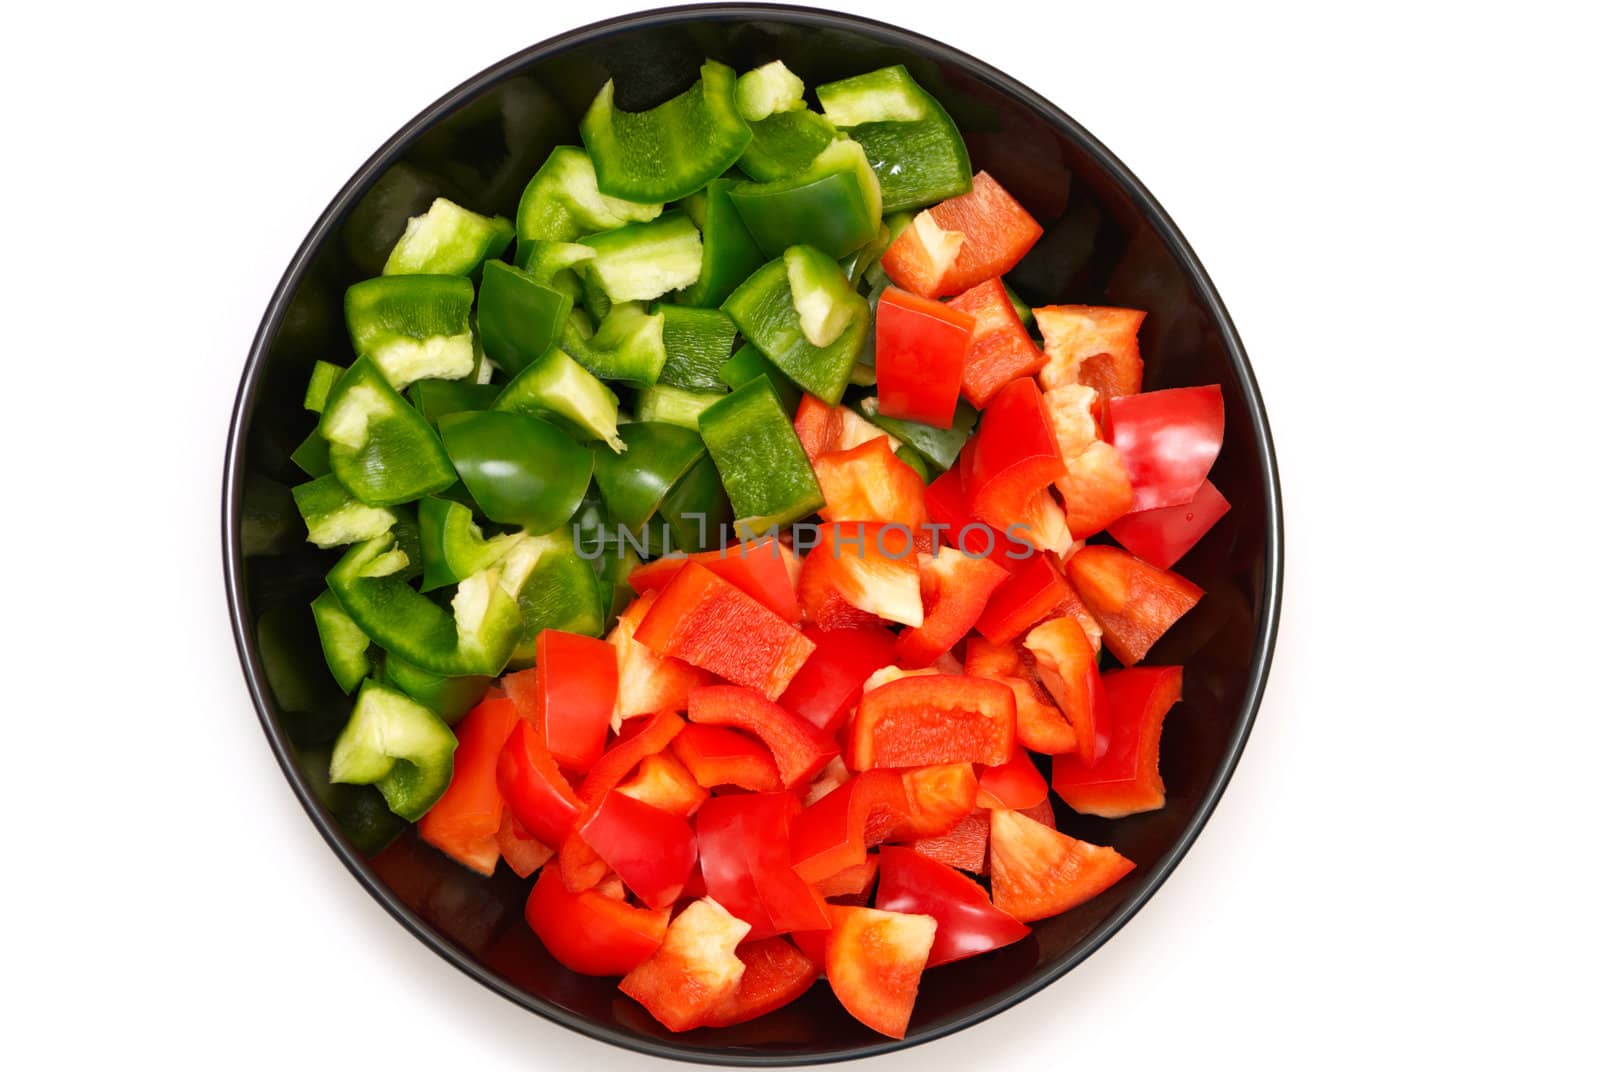 Variation of red and green peppers on a plate